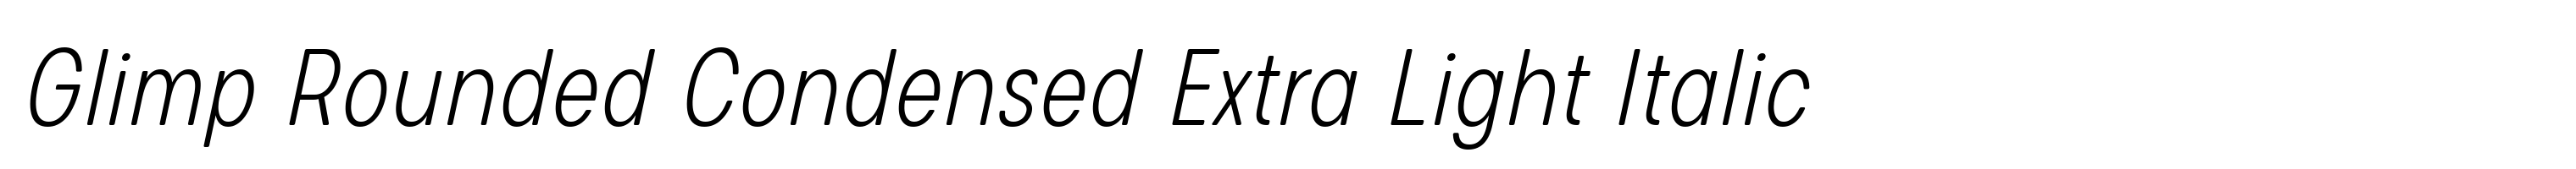 Glimp Rounded Condensed Extra Light Italic